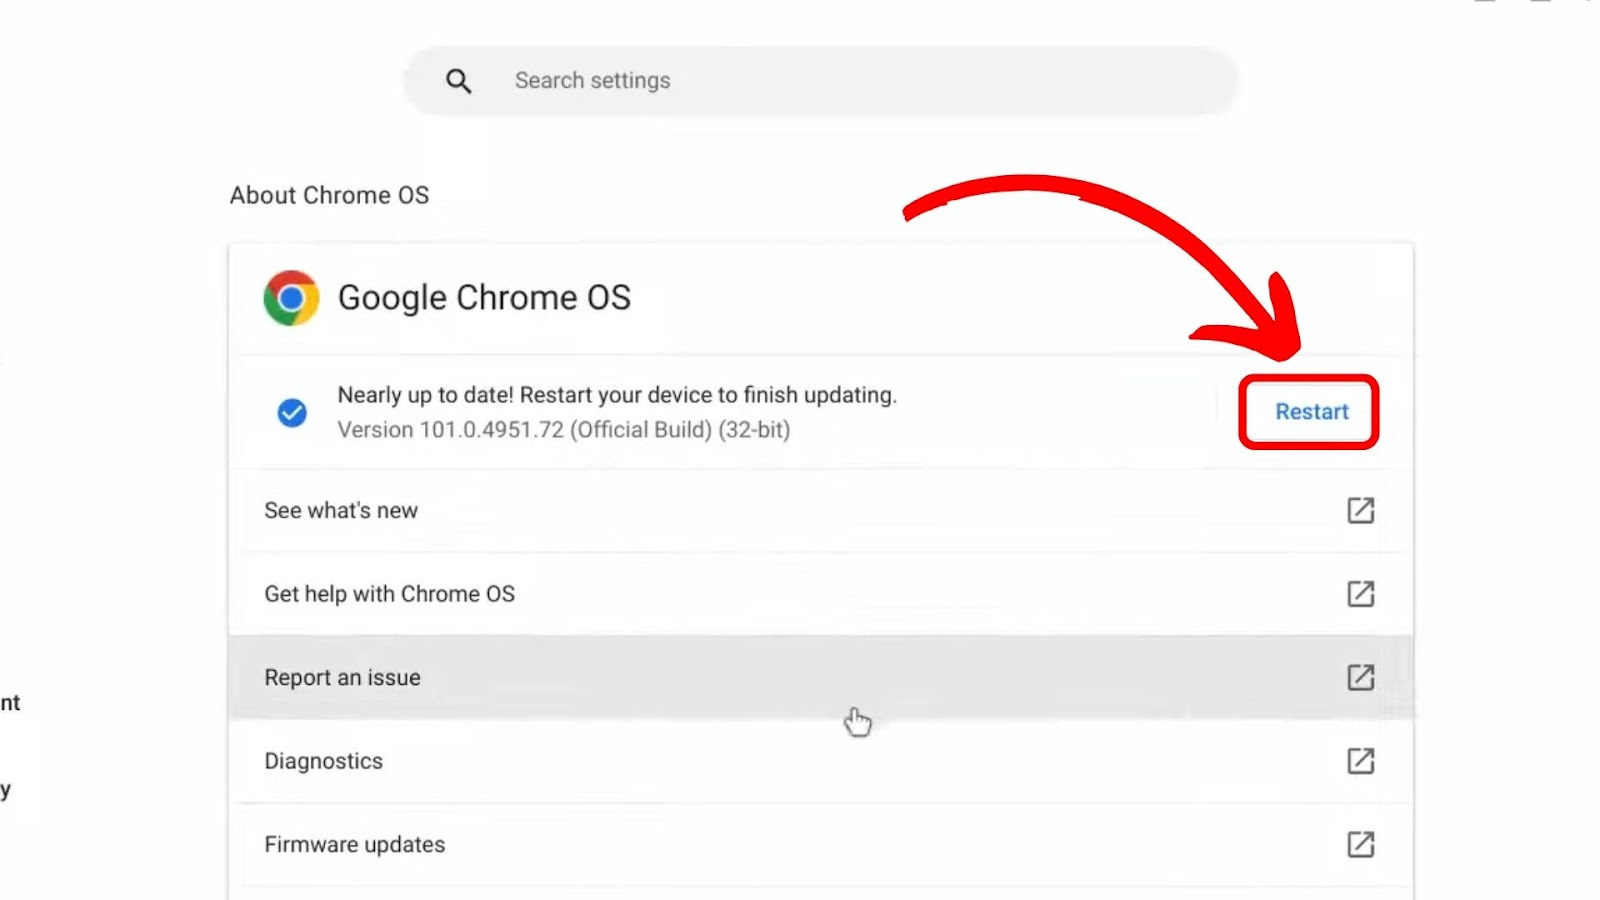 How to Finish Updating Chromebook